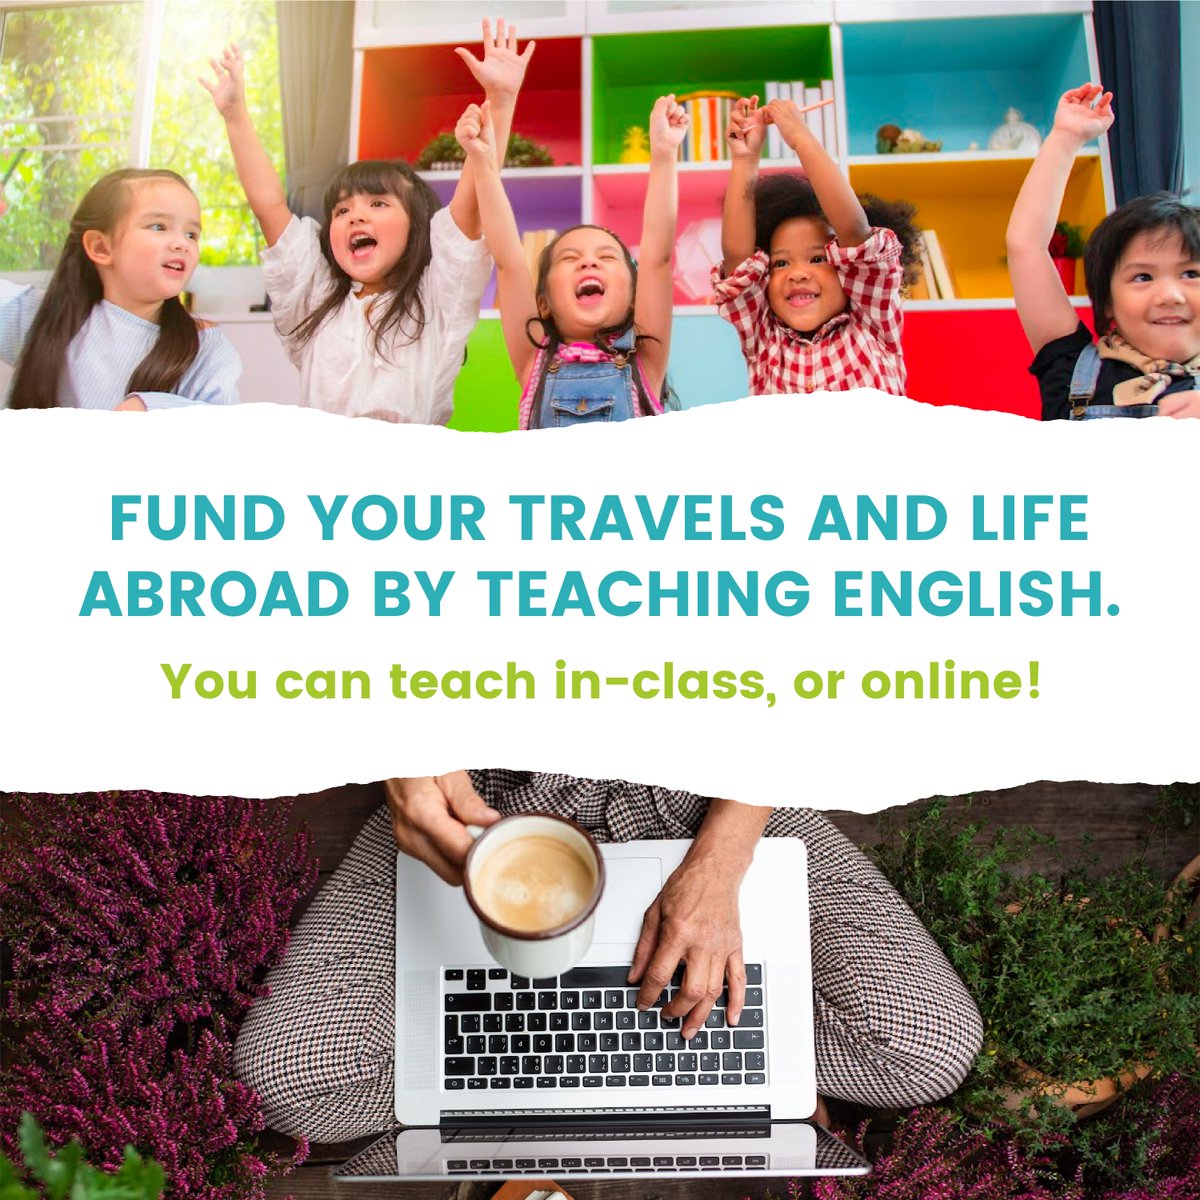 Dream of traveling the world? Or being able to work from absolutely anywhere, even from home? Then a TEFL certification is just for you!

#TESOLCourse #TesolCourses #TeachEnglish #TravelTeach #TEFL  #EnglishTeachersOfInstagram #TESOL  #TesolCertificate #ESL  #Level5 #Accredited